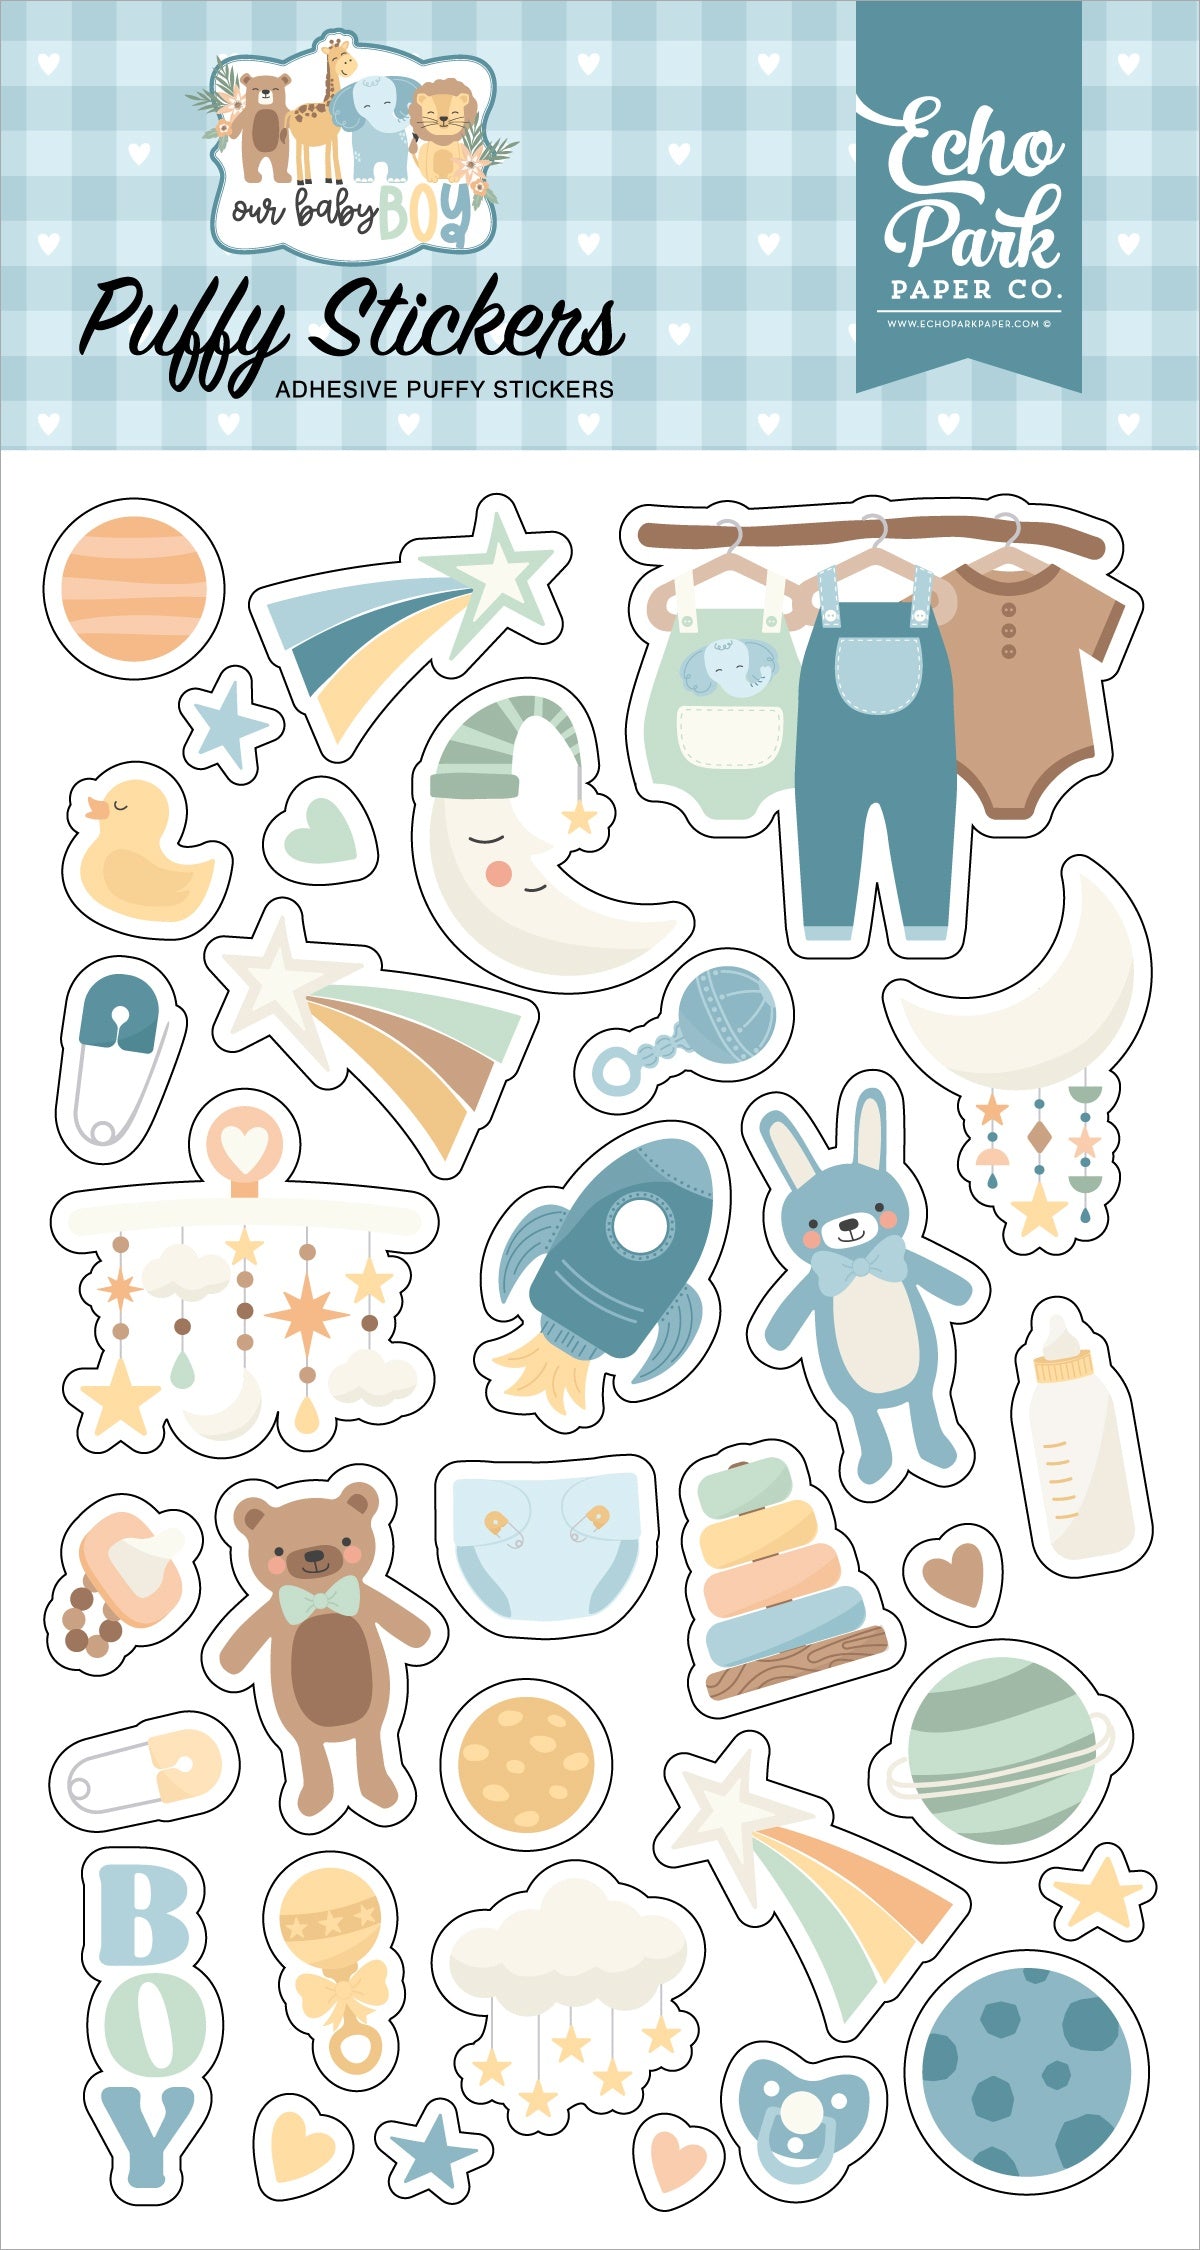 Play All Day Boy Puffy Stickers - Echo Park Paper Co.